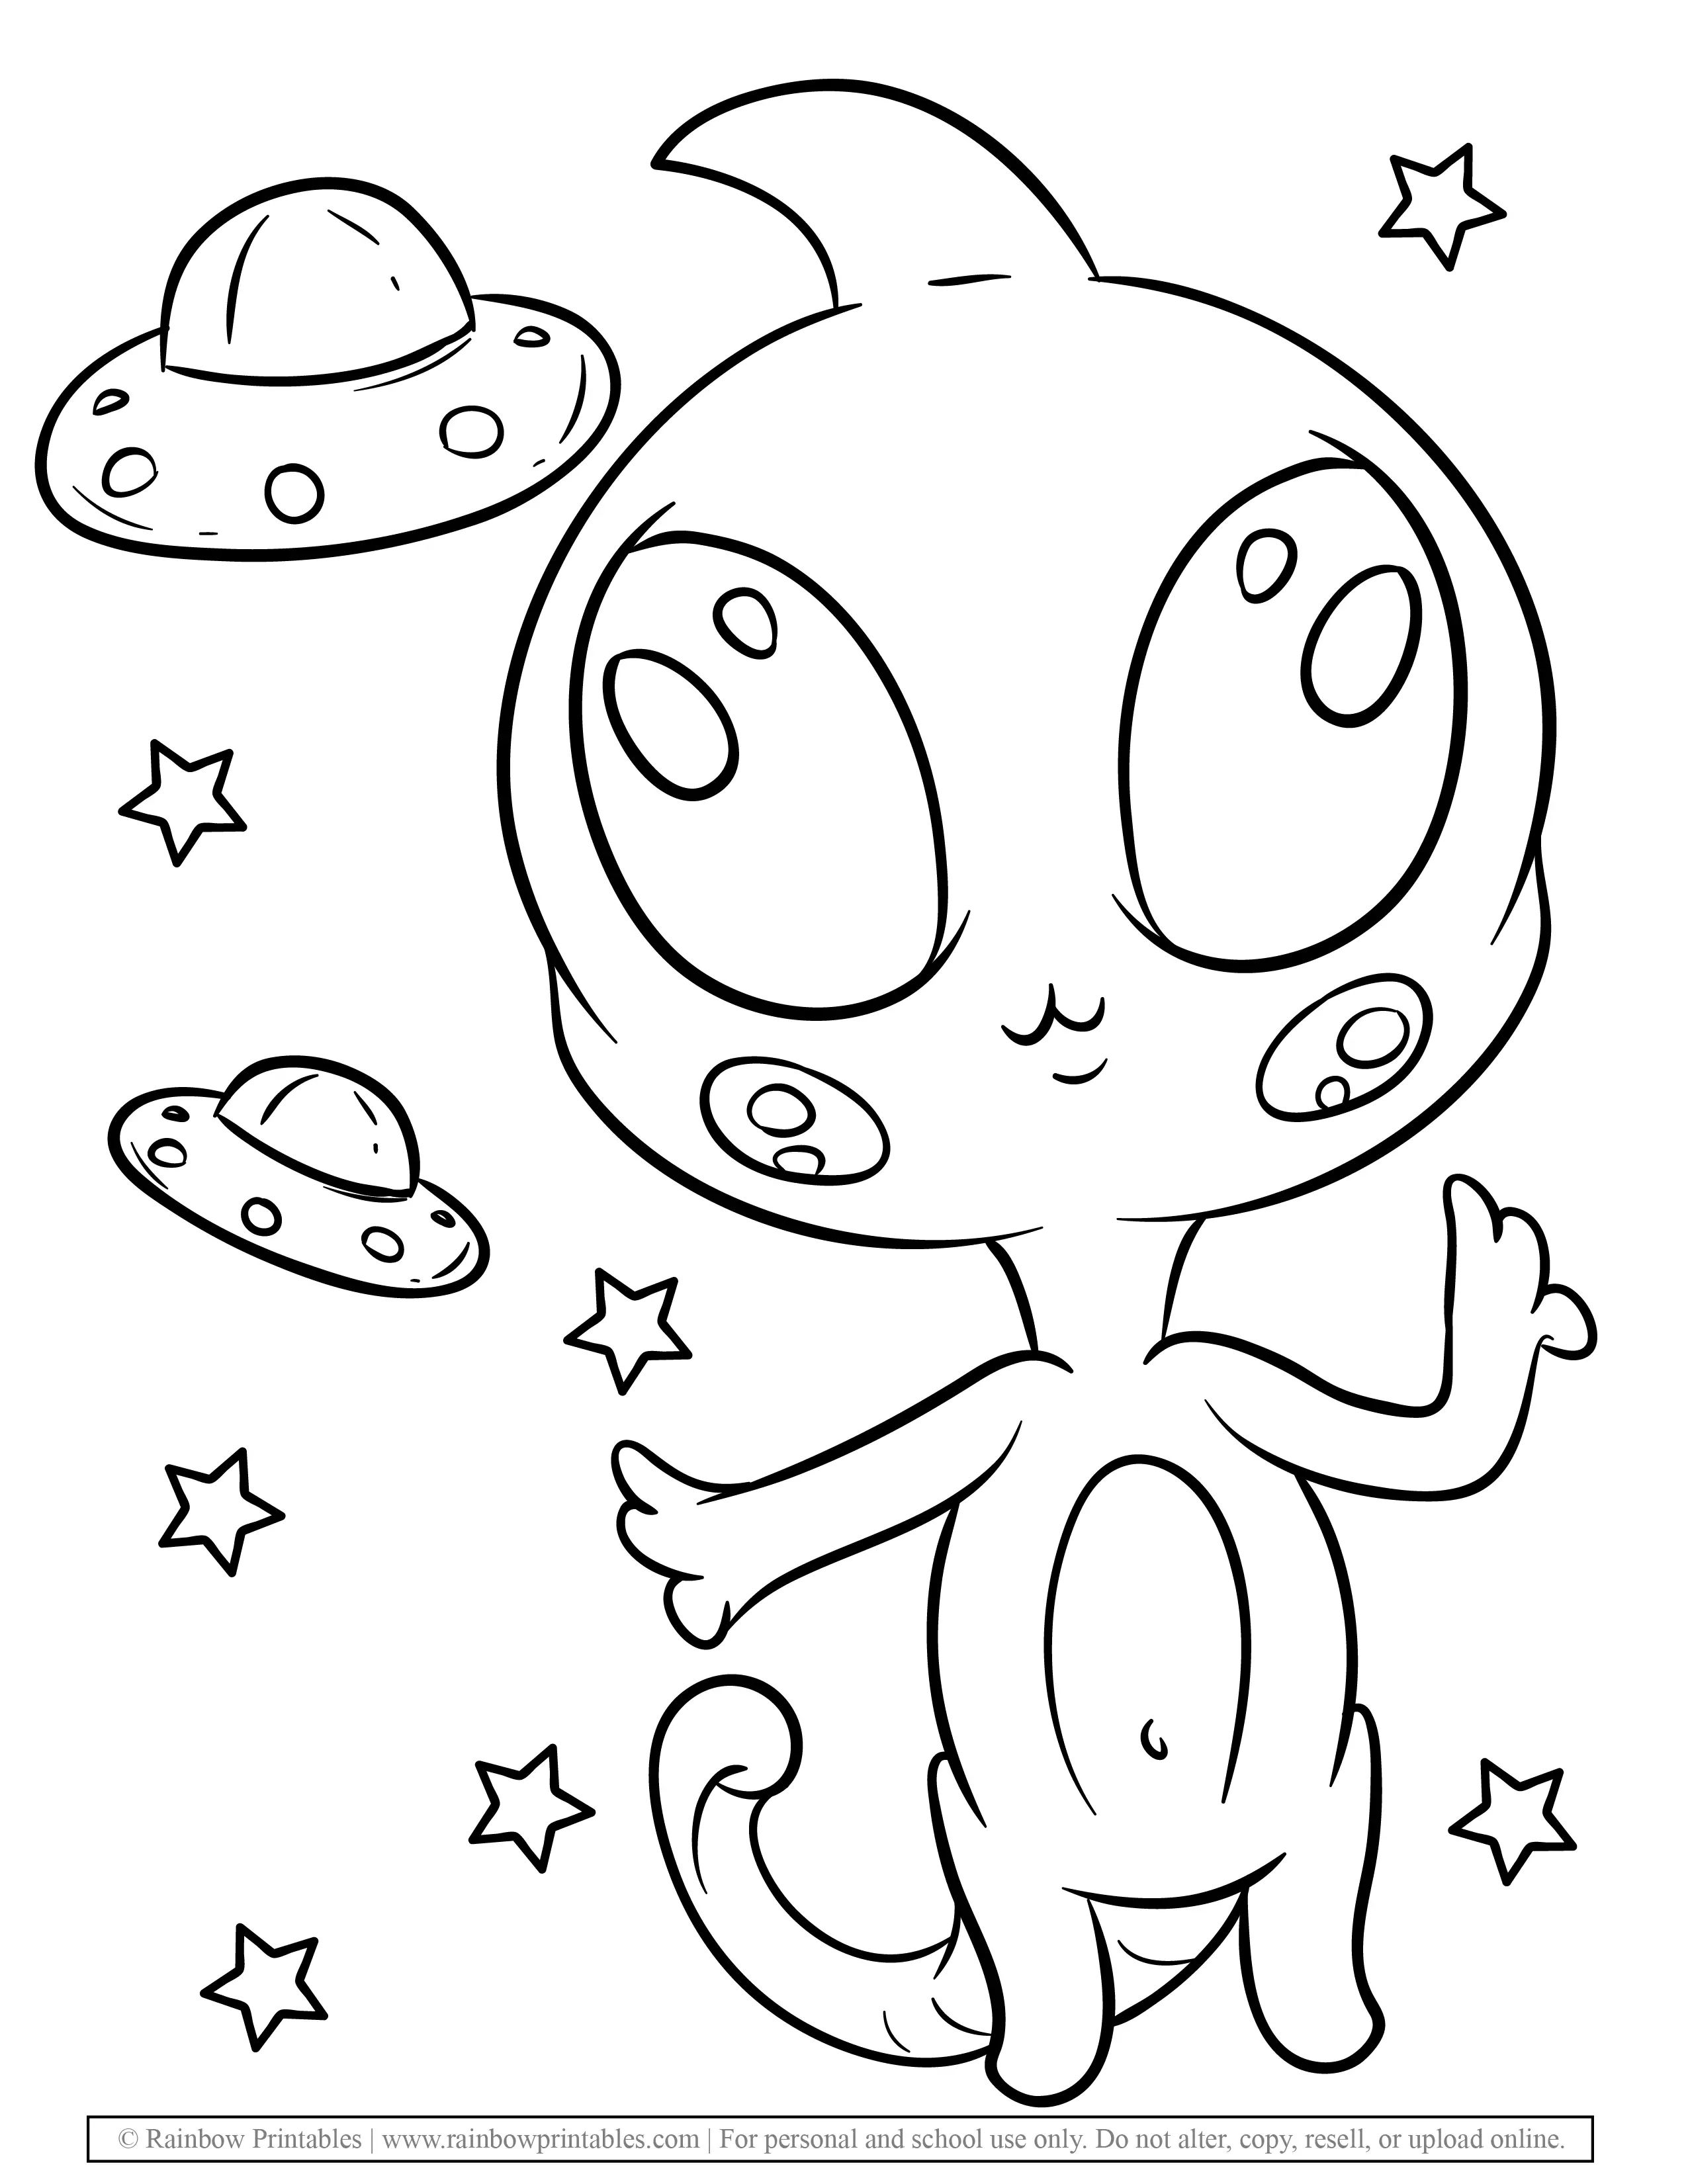 Cute Alien Astronaut Space UFO Smiling Dark Night Coloring Pages for Kids 2 Adorable